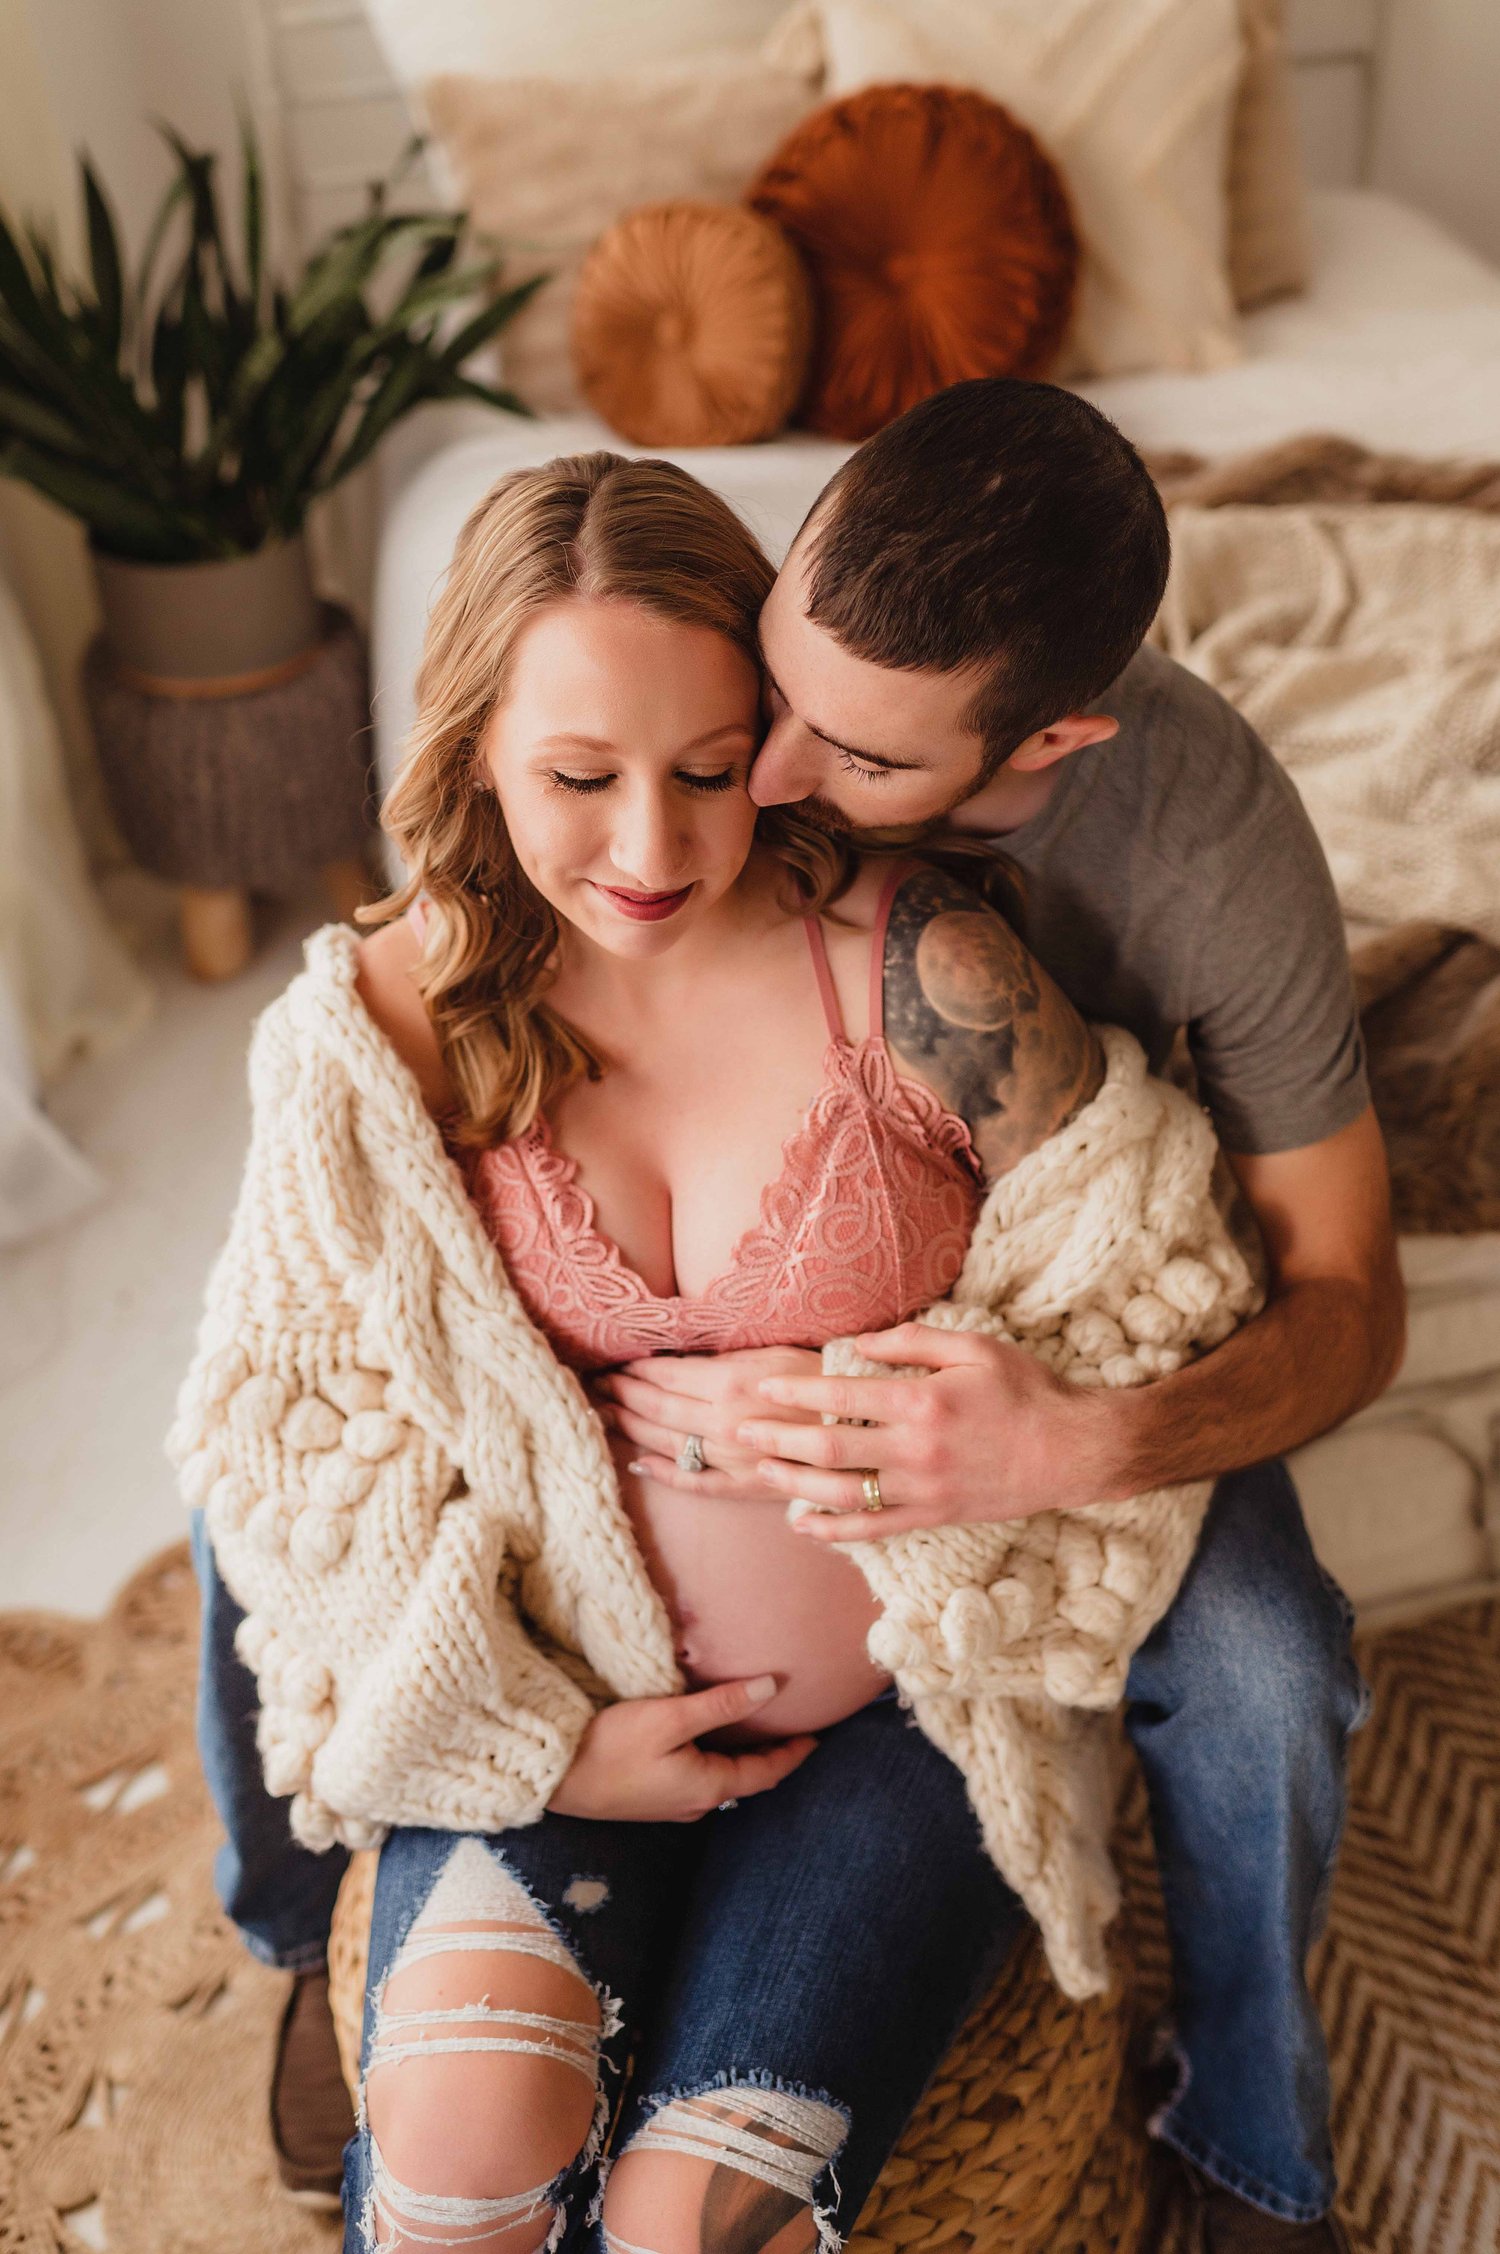 intimate couple's maternity session in studio, cami and jeans maternity photos, baby bump photos with partner in studio